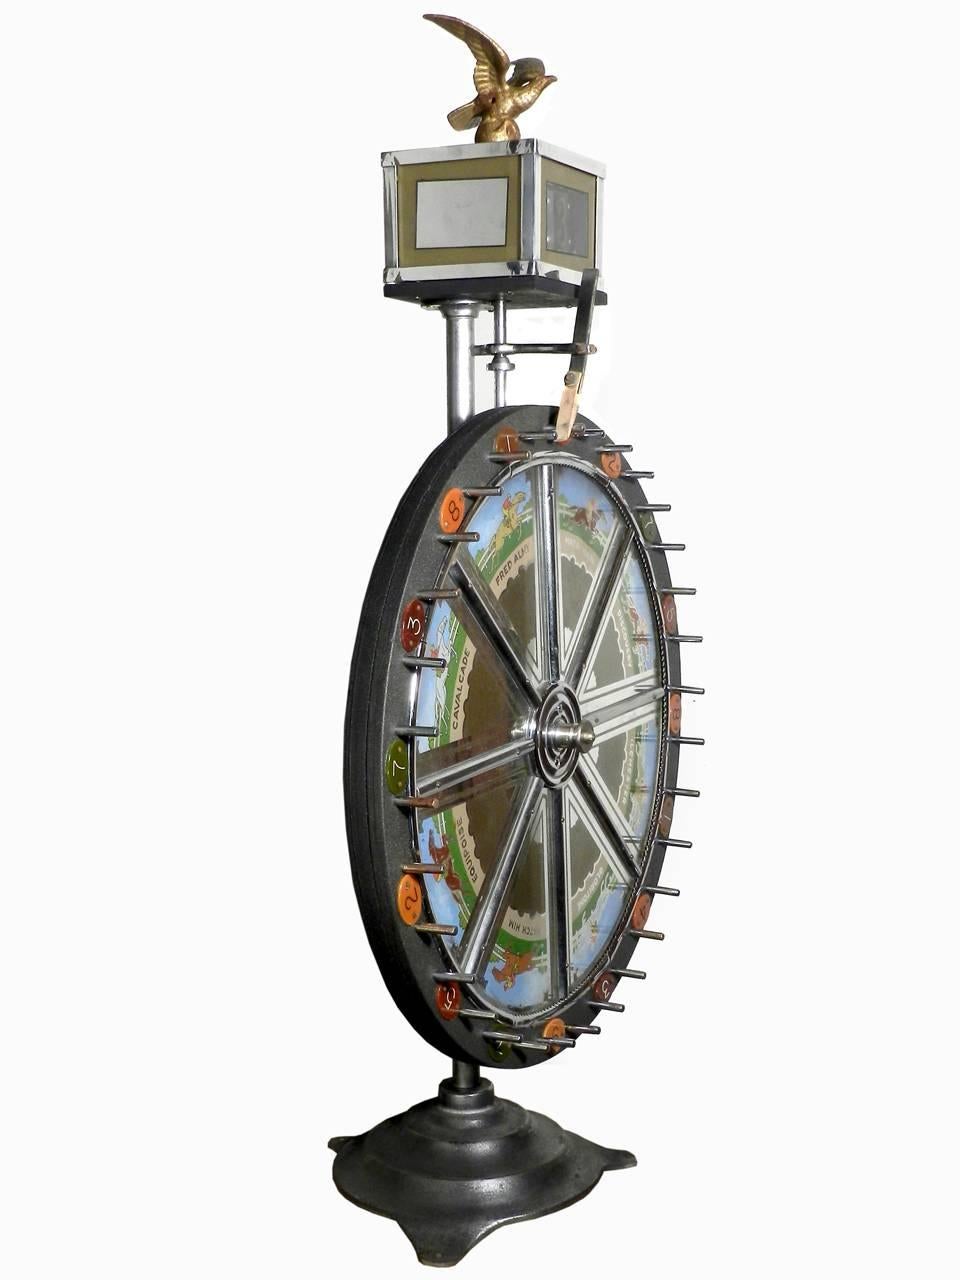 This is one of the most elaborate wheel of Fortune H.C. Evans & Co ever made. What makes this one rare is it's smaller size. These decorative wheels were handmade and top of the line. This example has all the original reverse painted glass and